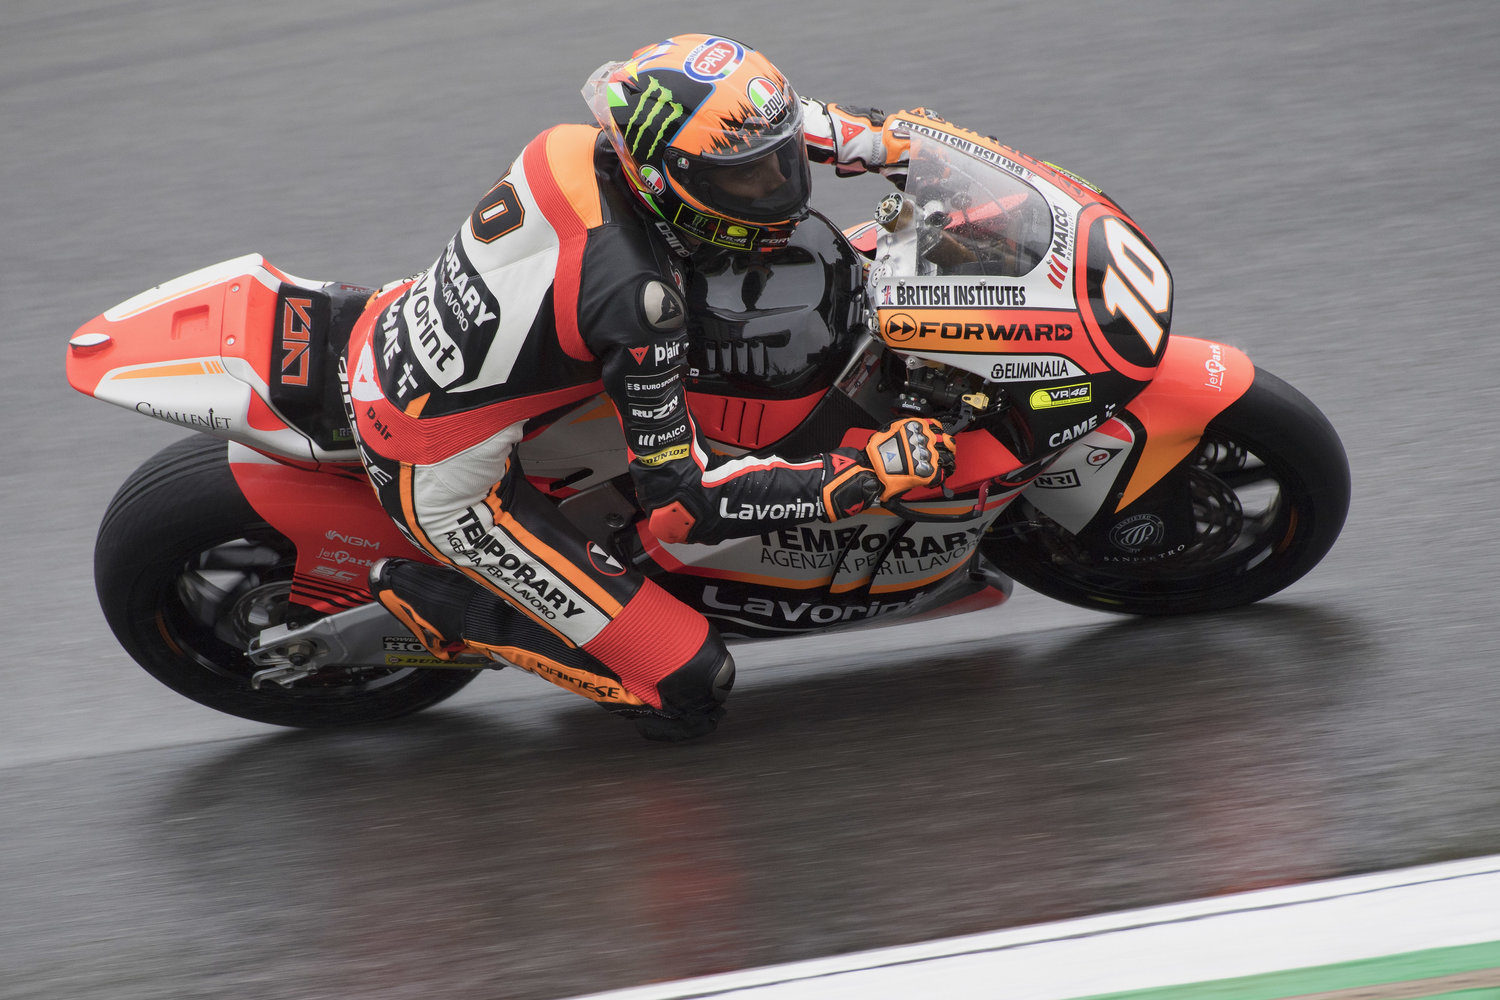 Positive opening in mixed conditions for Marini and Baldassarri in Brno